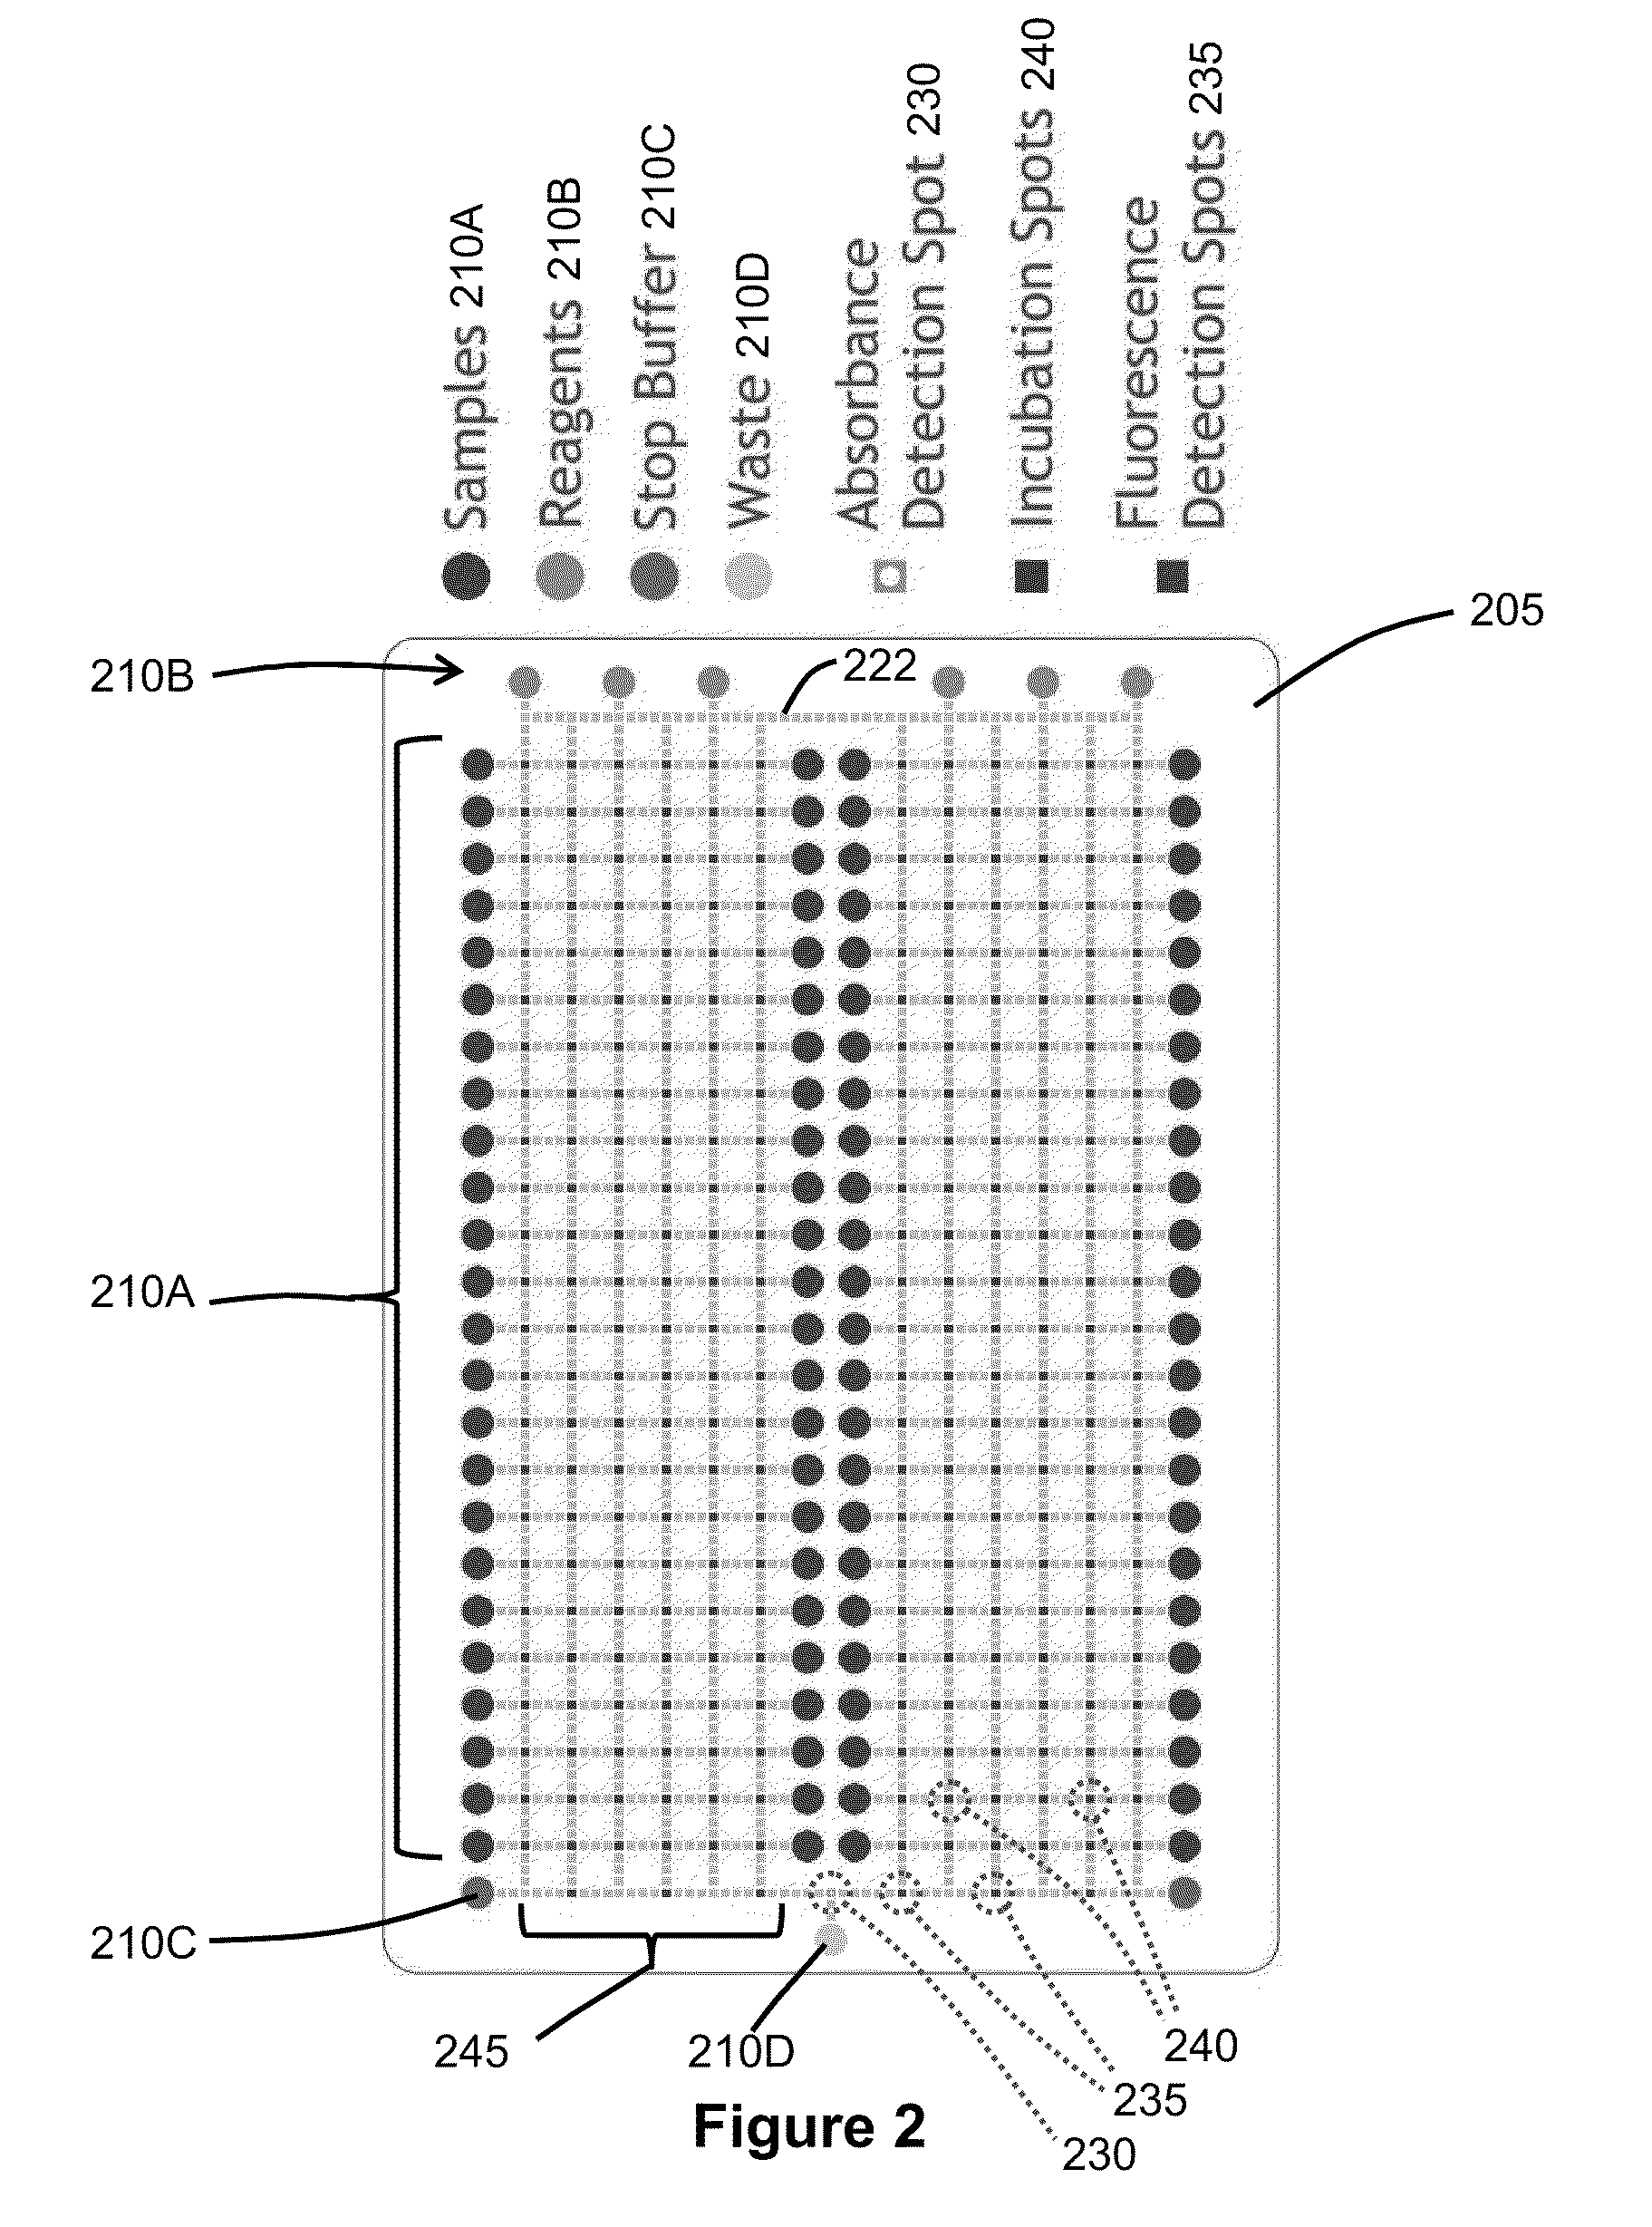 Enzyme Assays for a Droplet Actuator